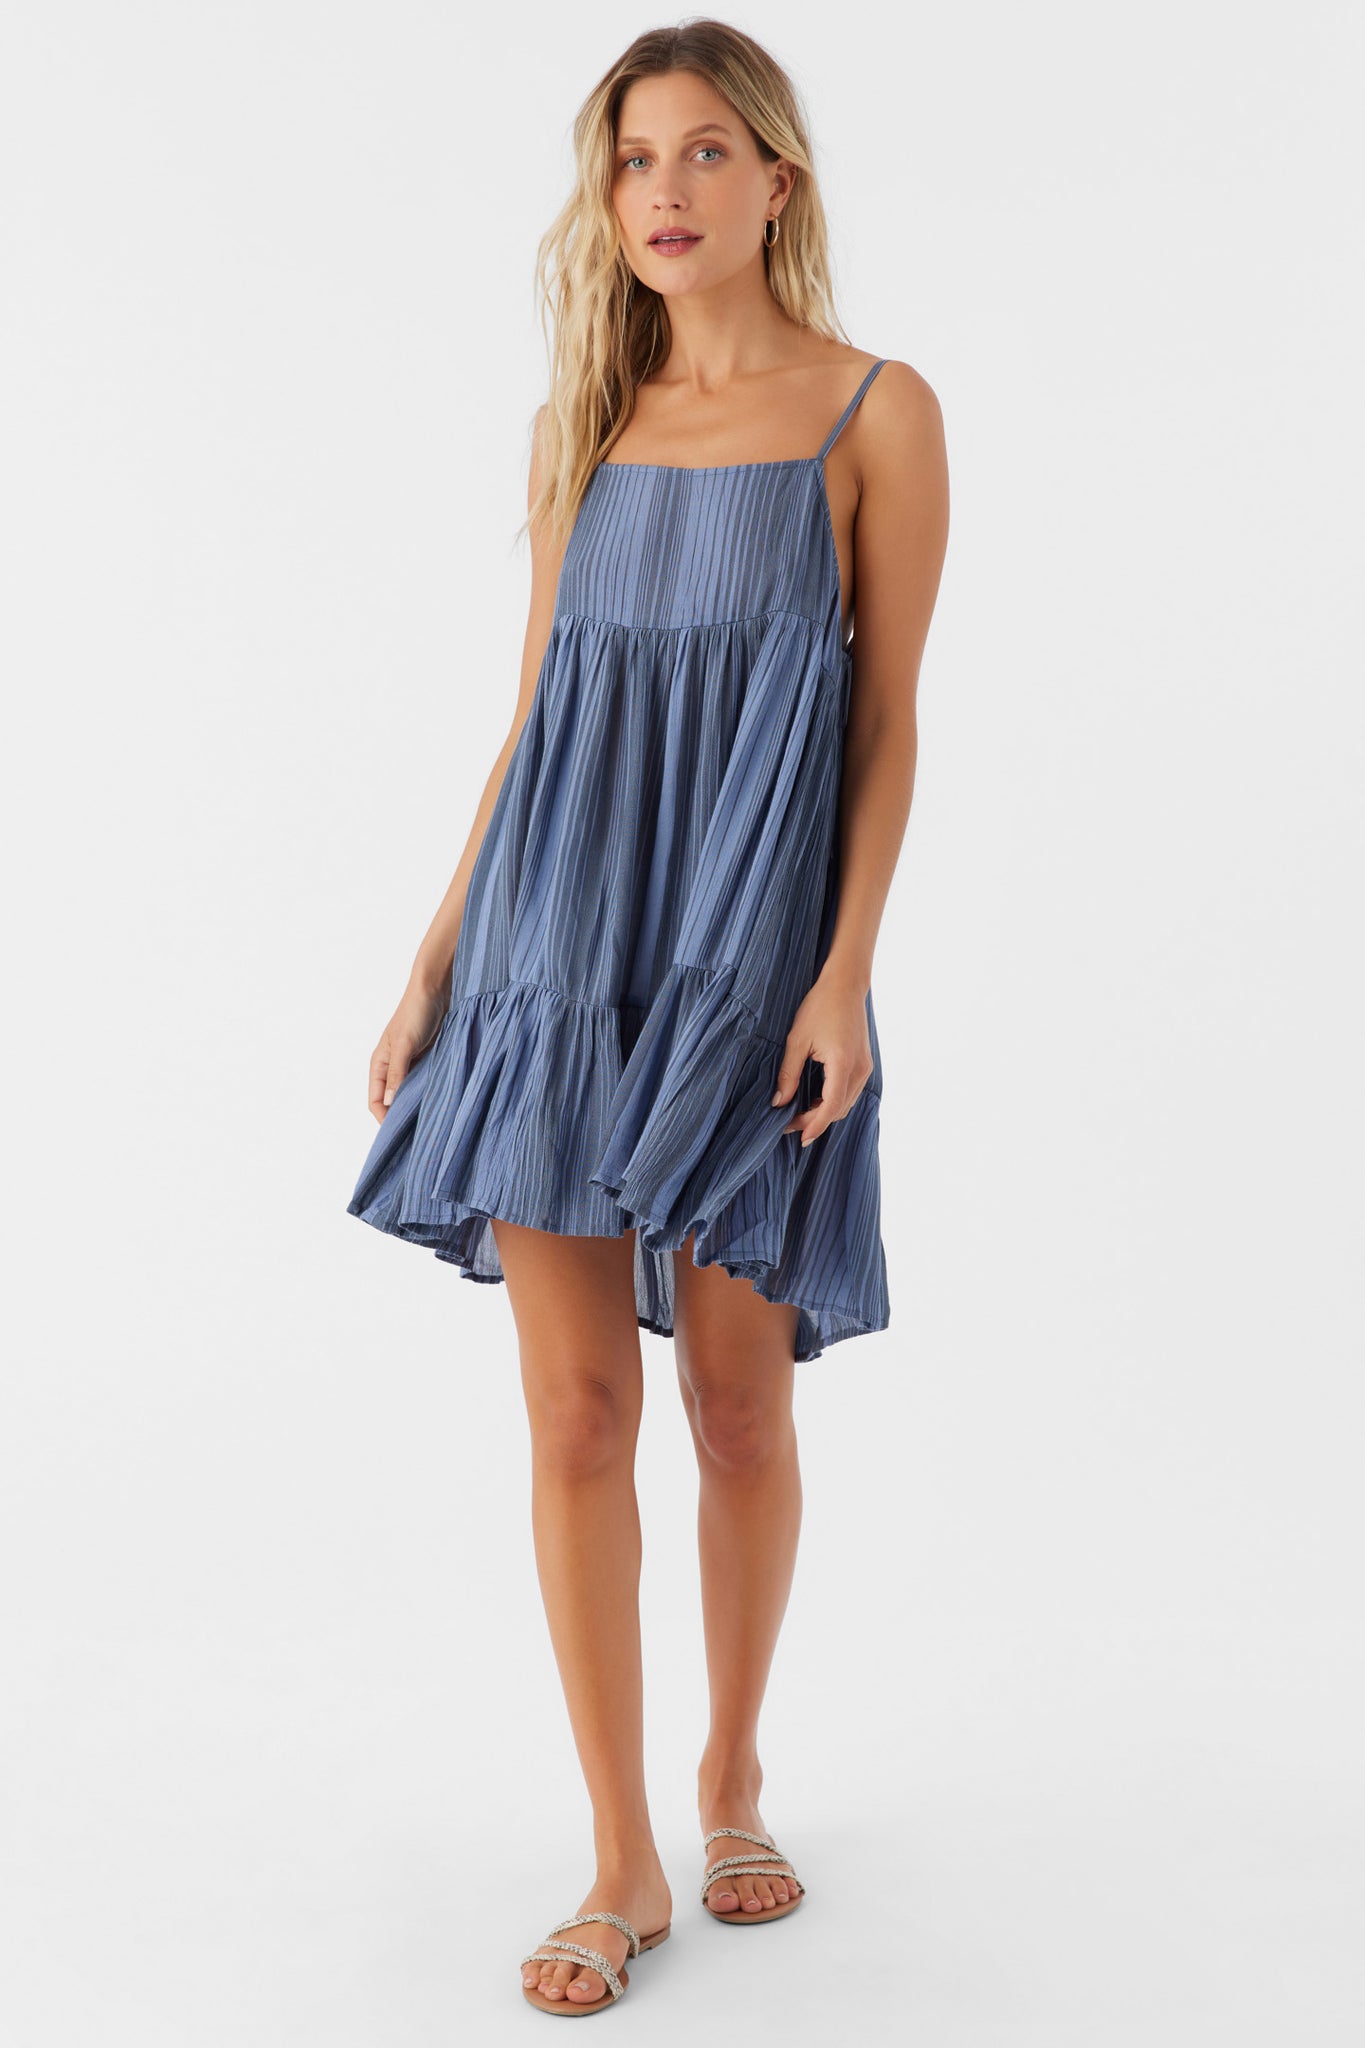 SALTWATER ESSENTIALS RILEE STRIPED COVER-UP DRESS